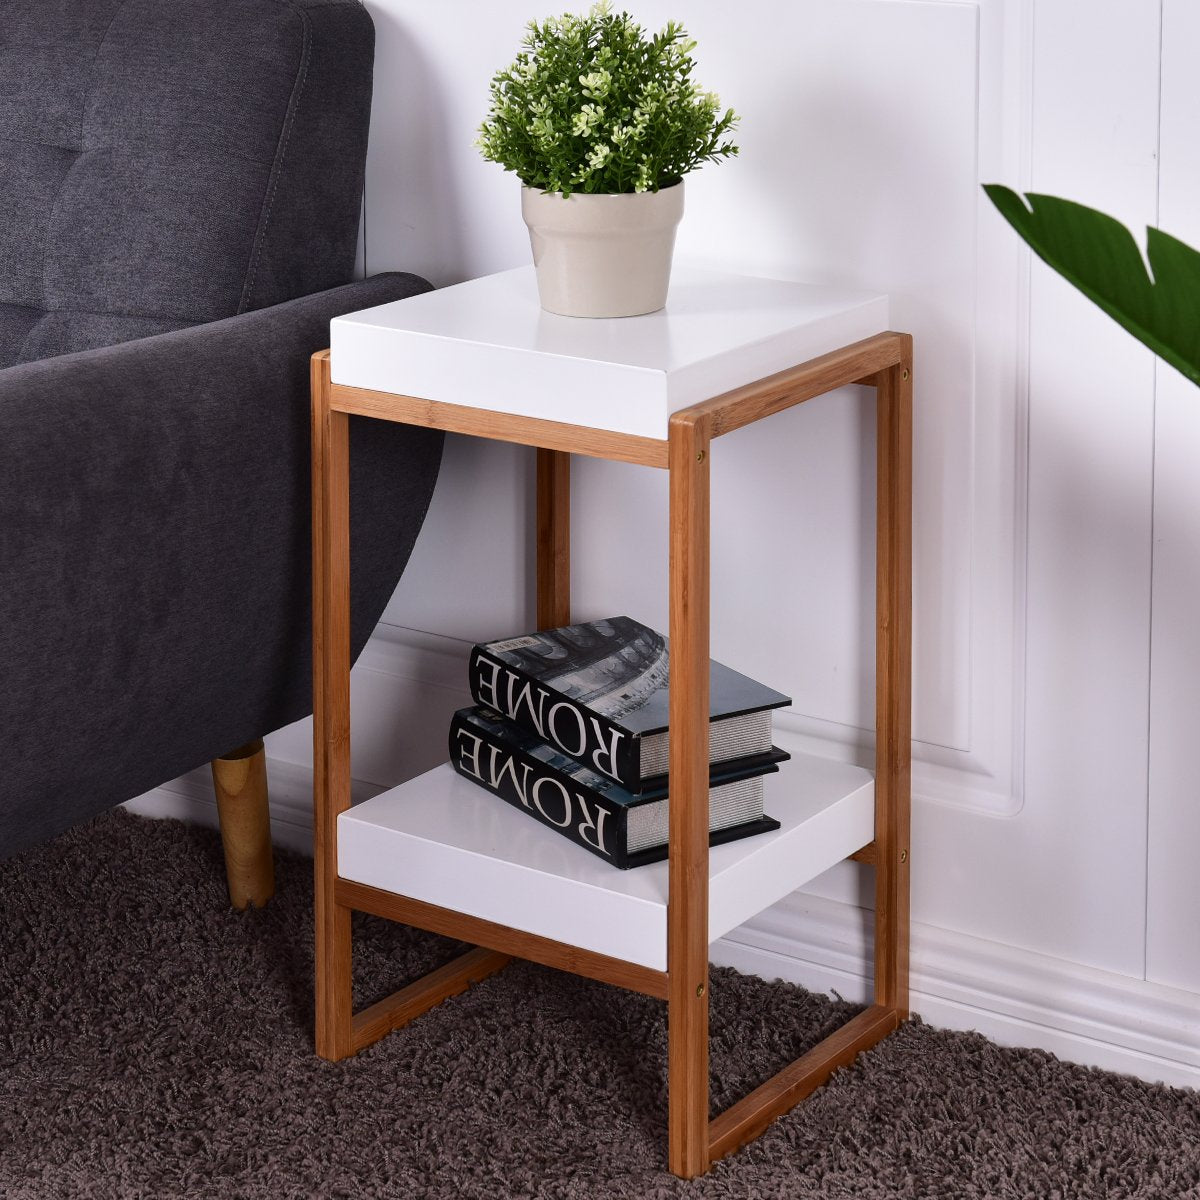 ST-34 Side Table